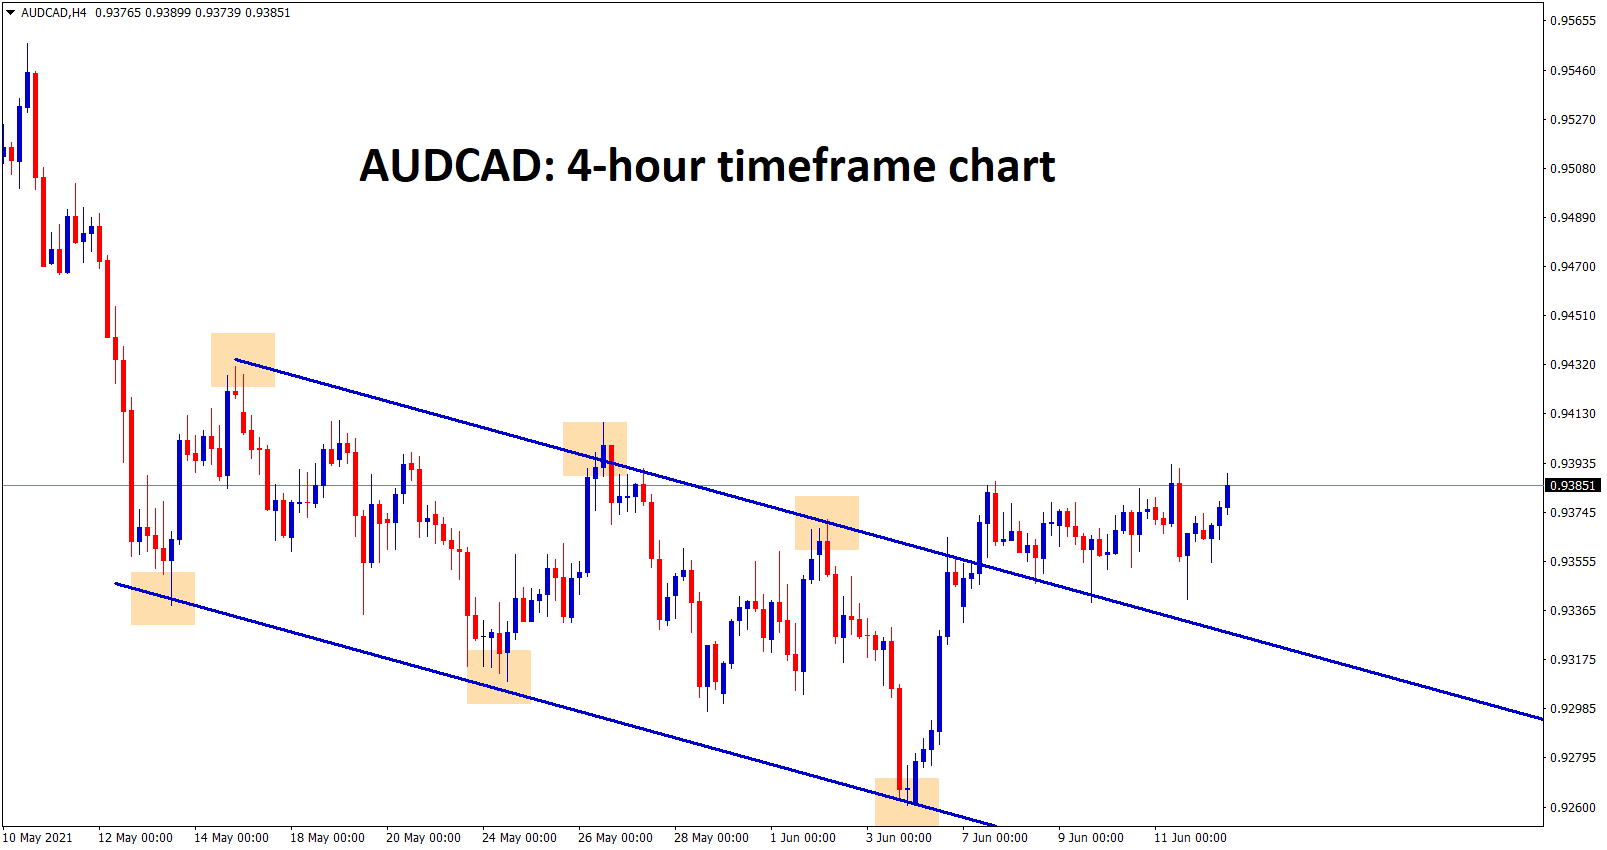 AUDCAD is consolidating after breaking the top of the downtrend line